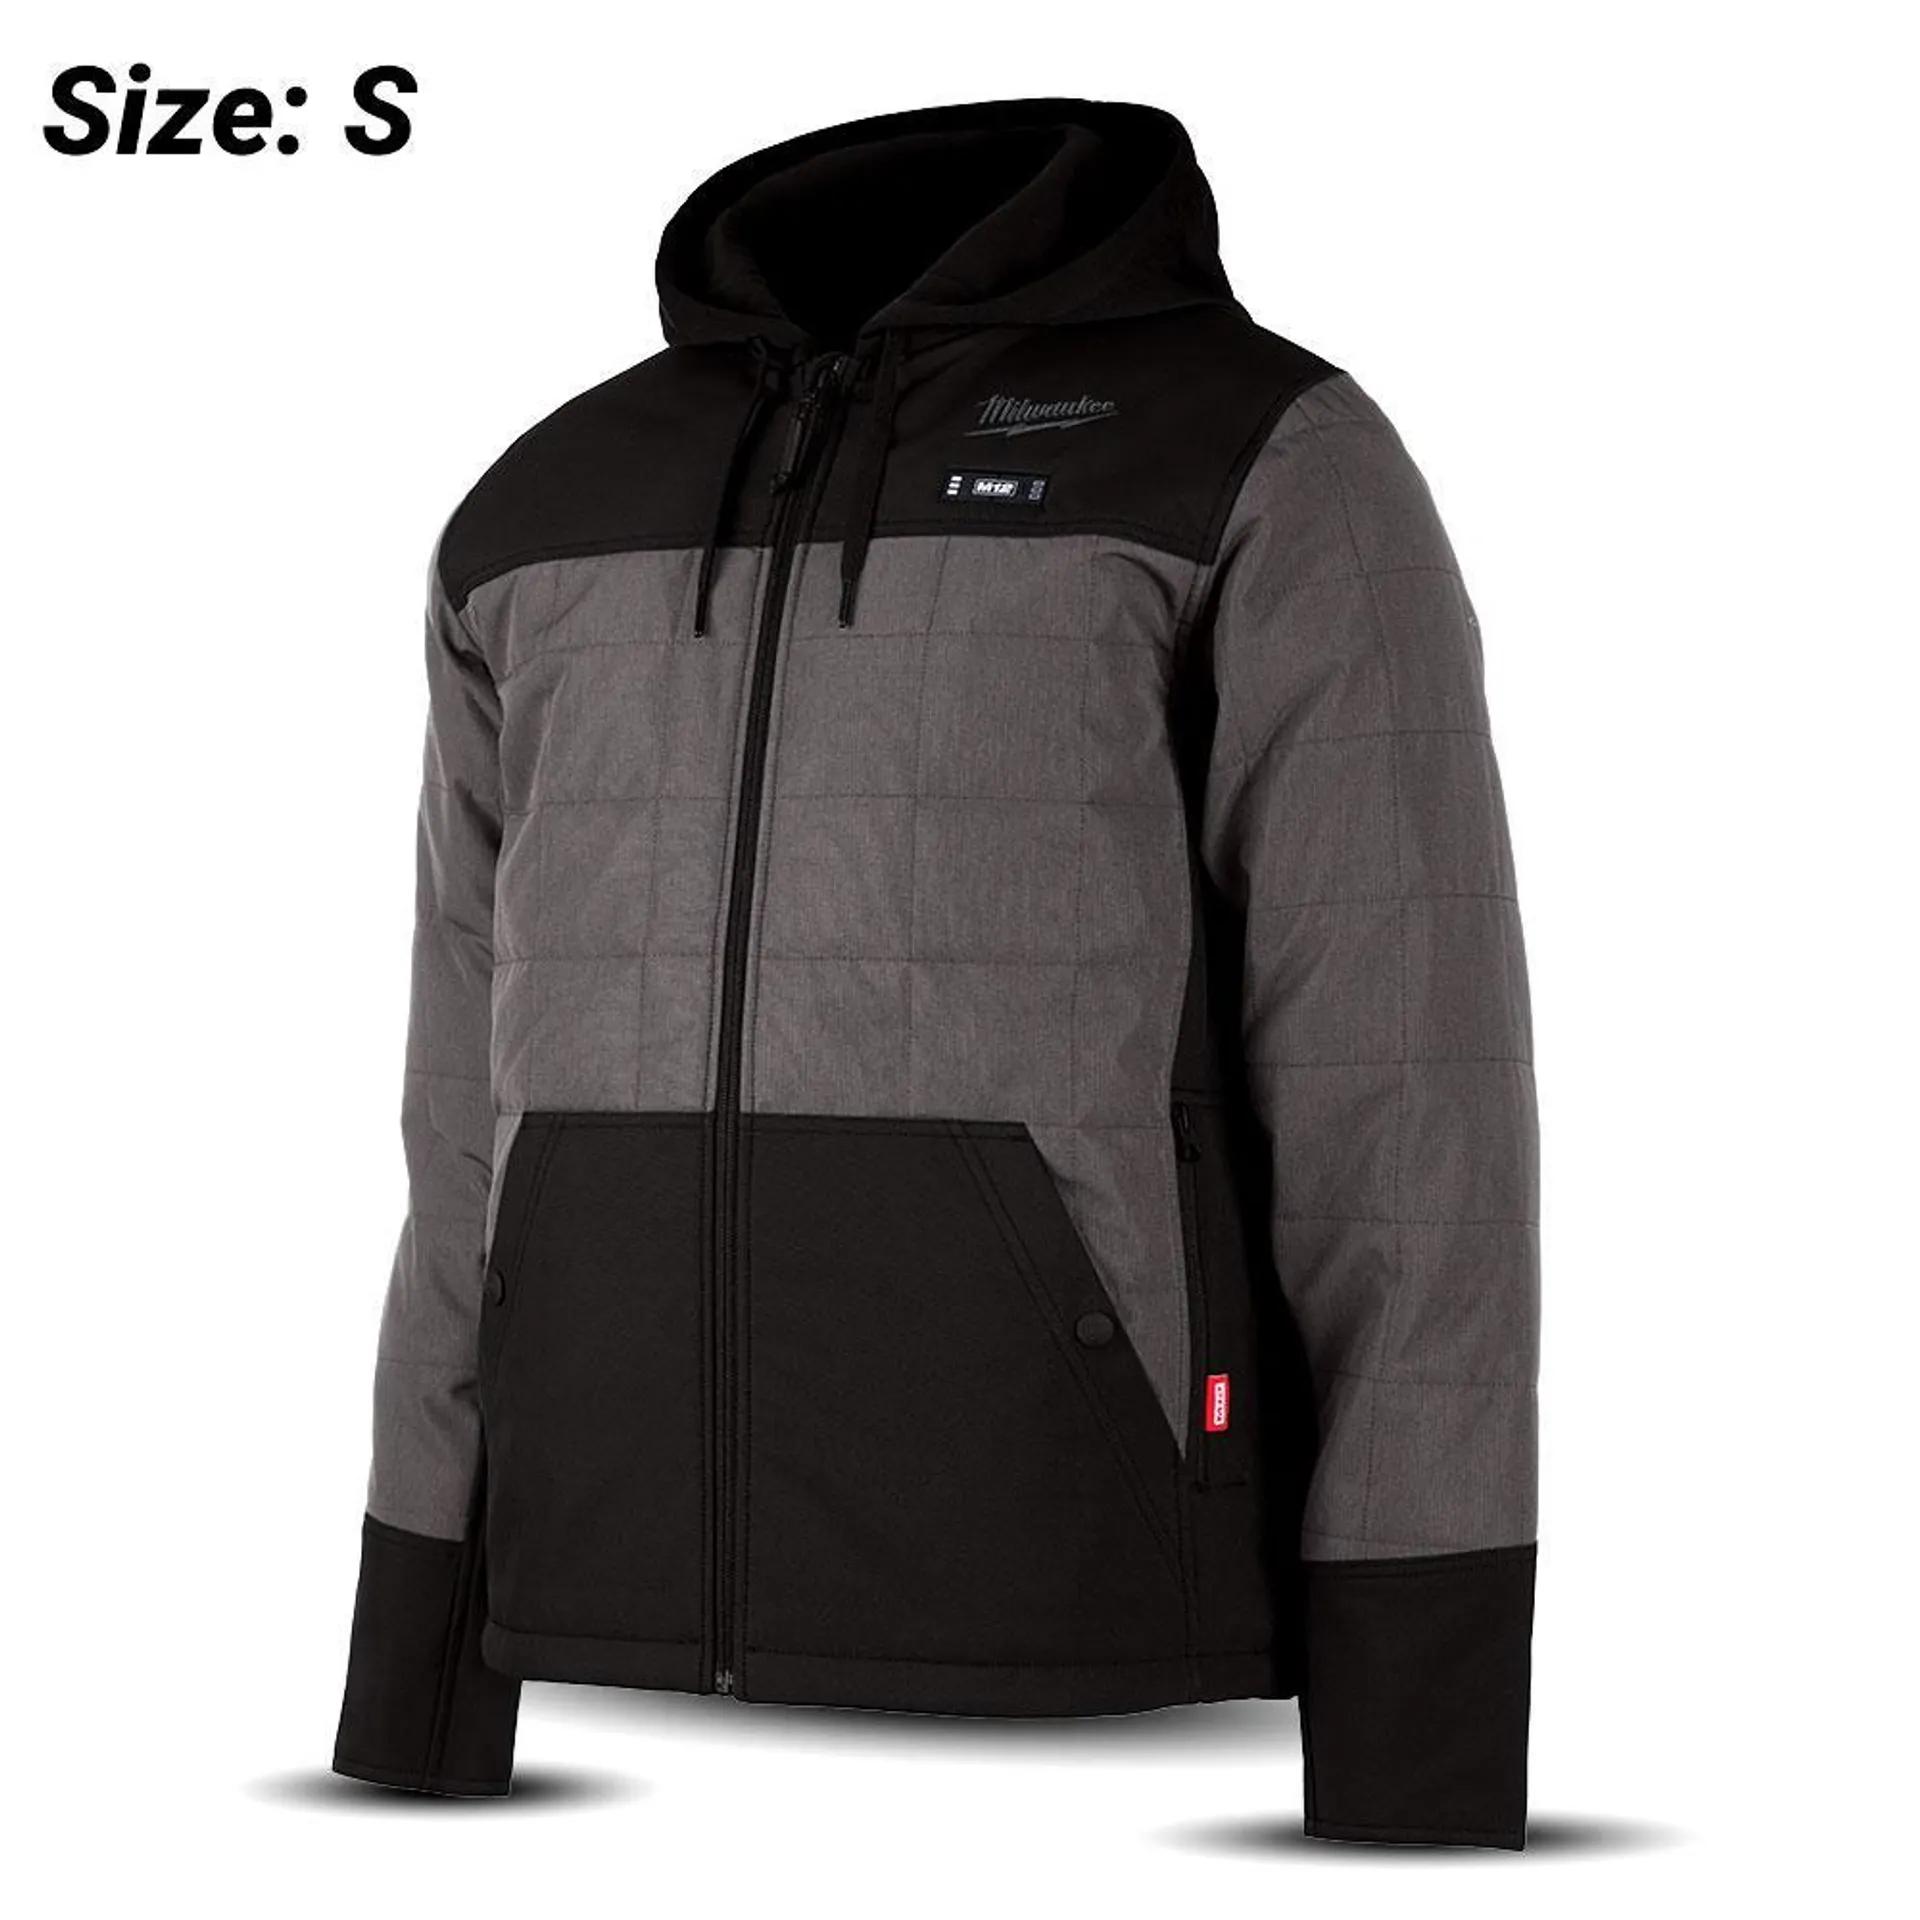 Milwaukee M12HPJGREY0S 12V Li-ion Cordless AXIS™ Grey Heated Jacket (SMALL) - Skin Only